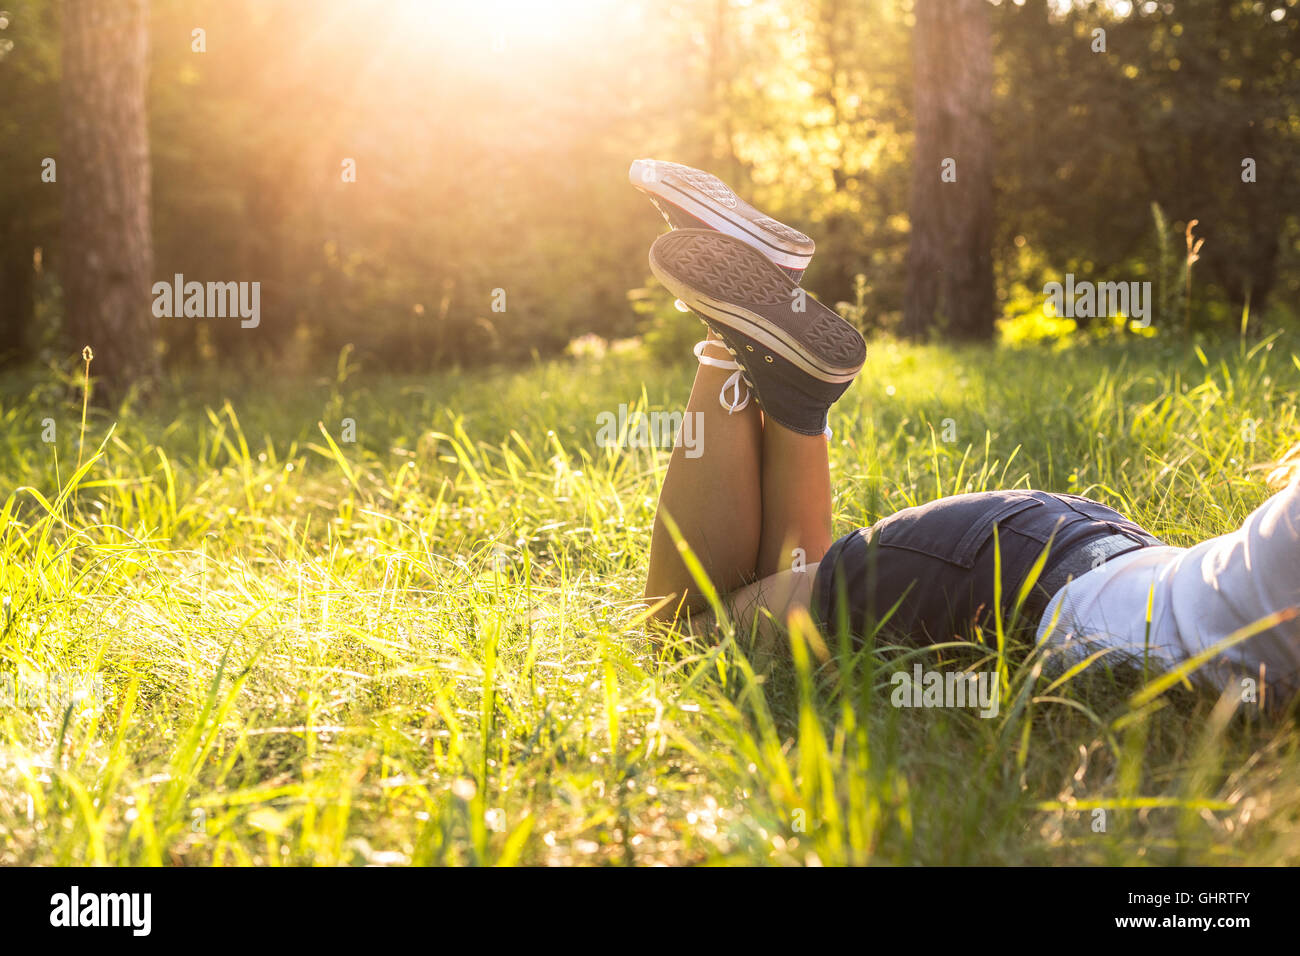 Woman legs wearing jeans sneakers lying on a grass in a forest lawn in the evening Stock Photo